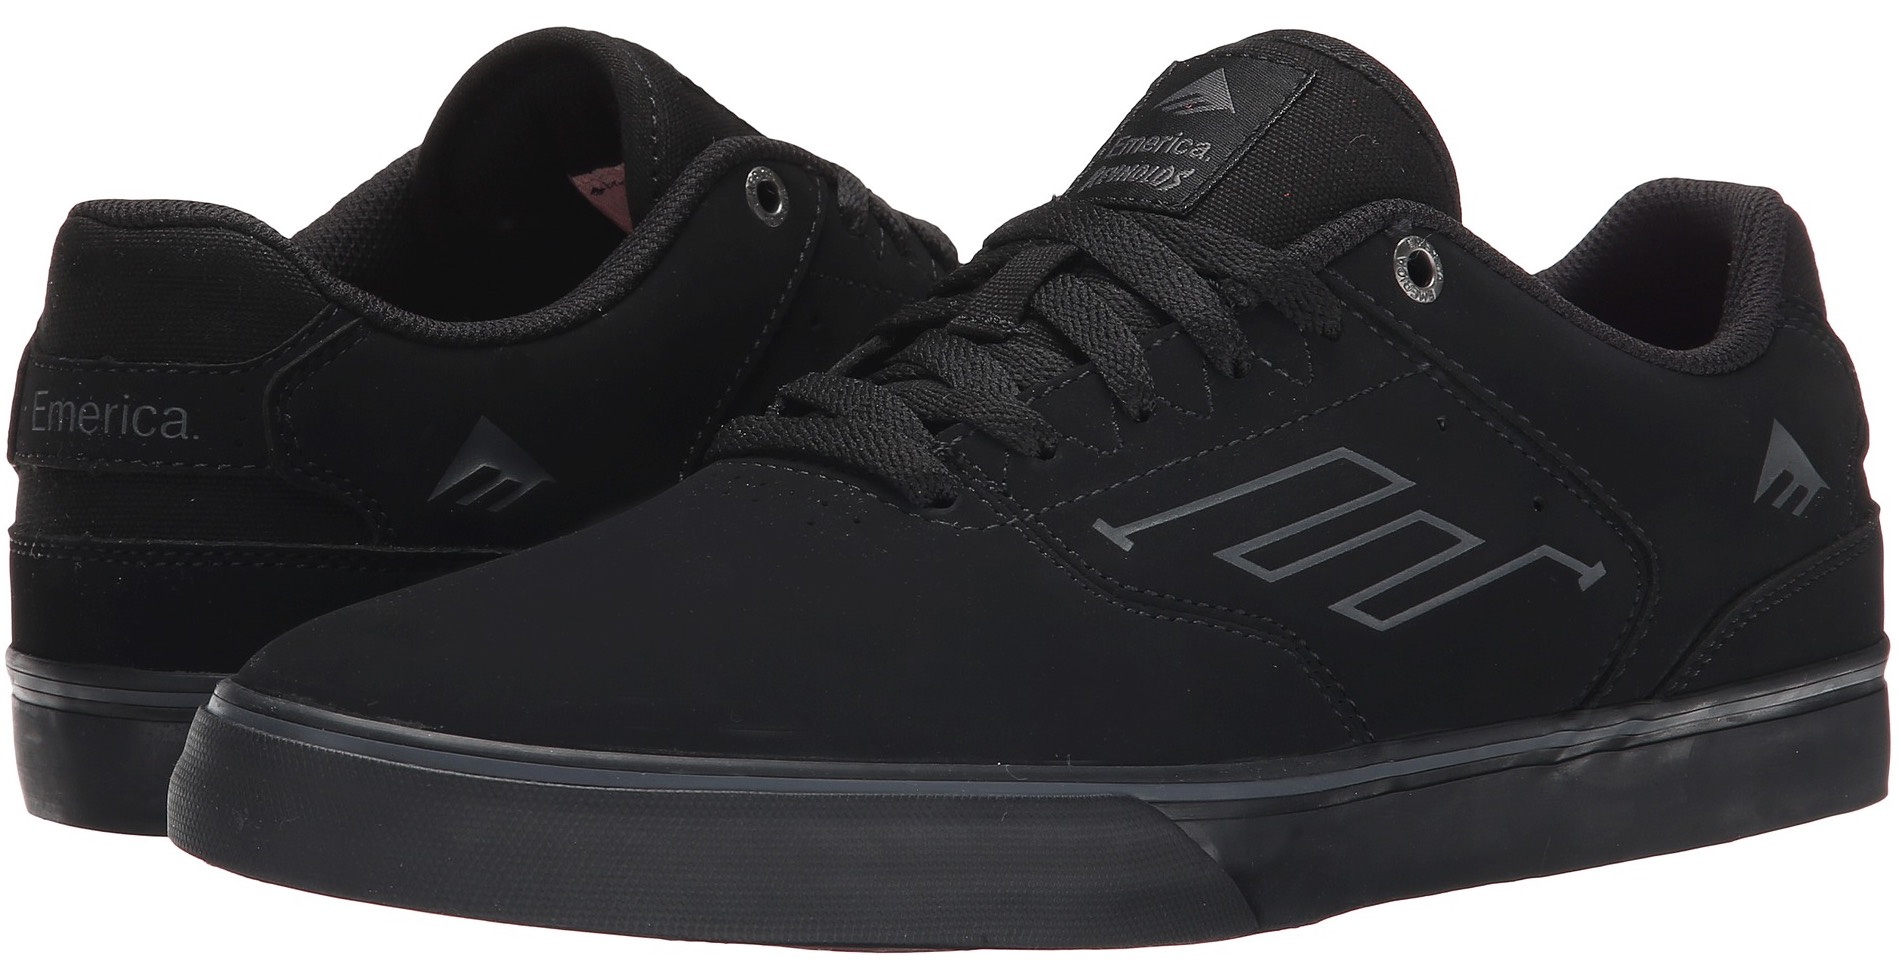 Emerica Vegan skateboard shoes Synthetic-suede